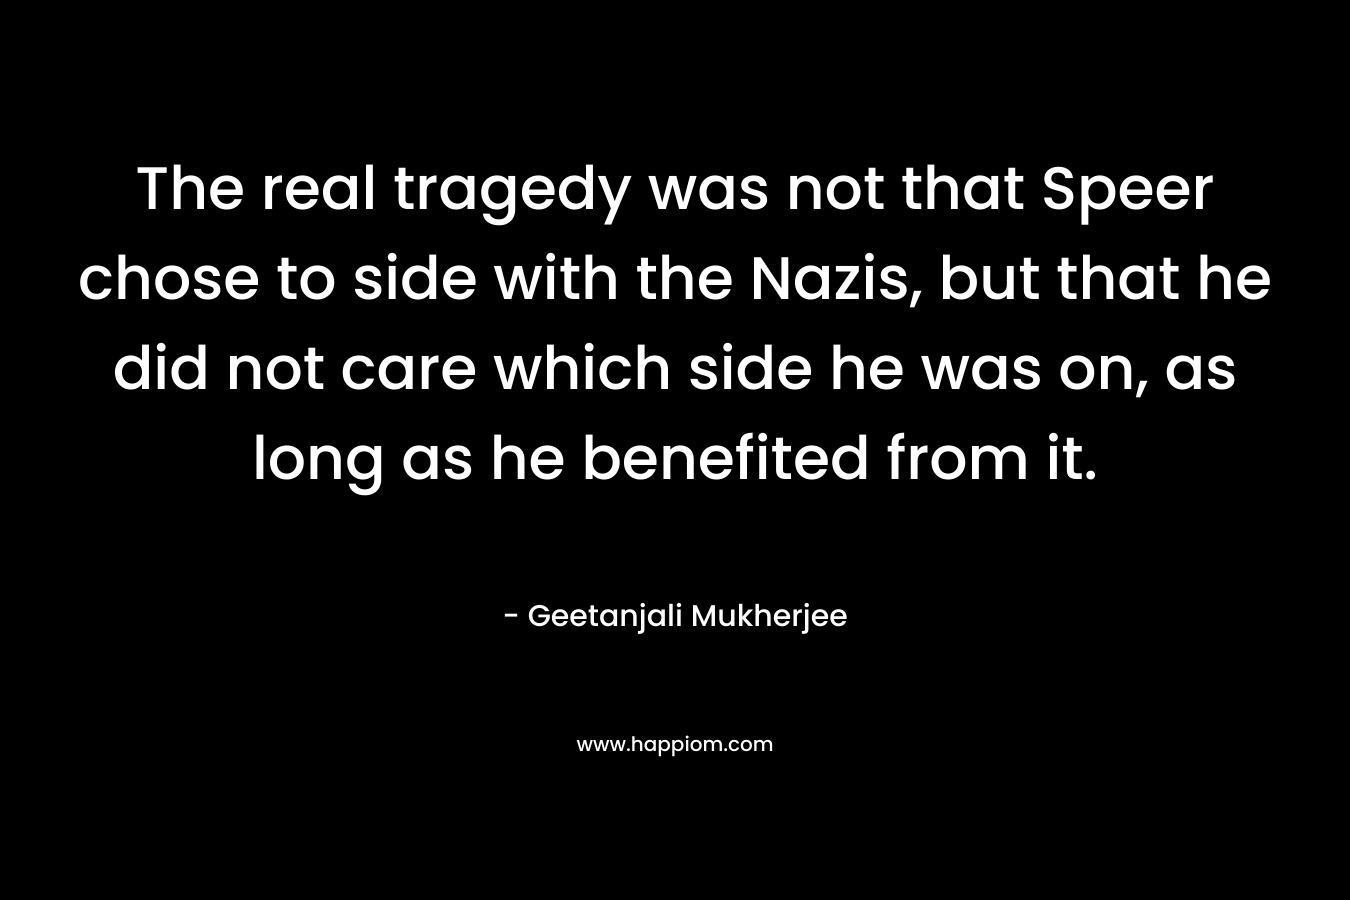 The real tragedy was not that Speer chose to side with the Nazis, but that he did not care which side he was on, as long as he benefited from it. – Geetanjali Mukherjee